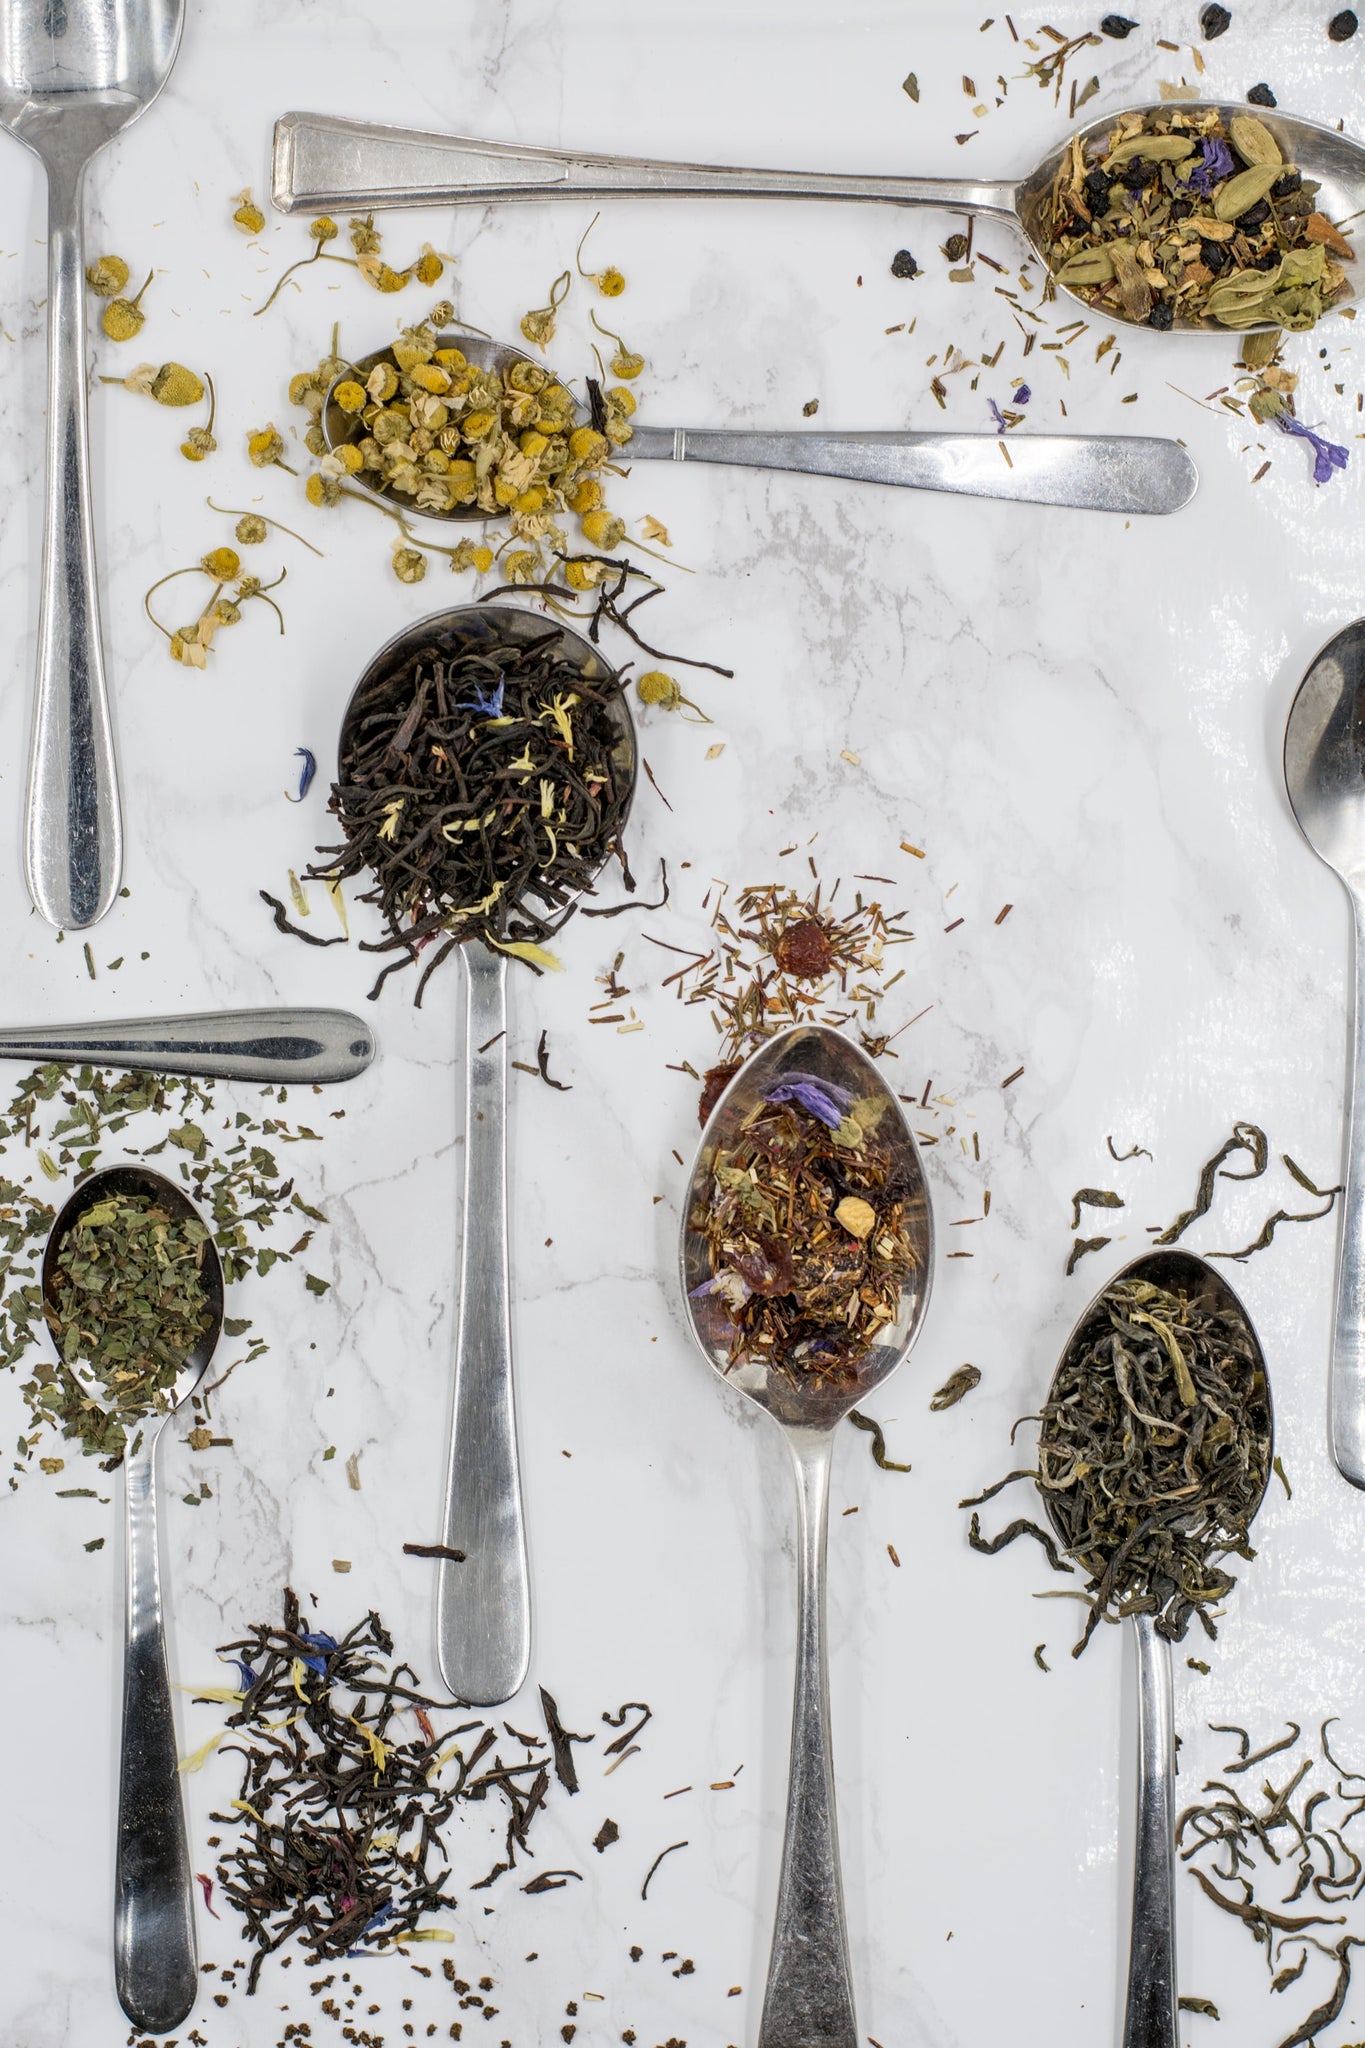 Learn how to brew Loose Leaf Teas